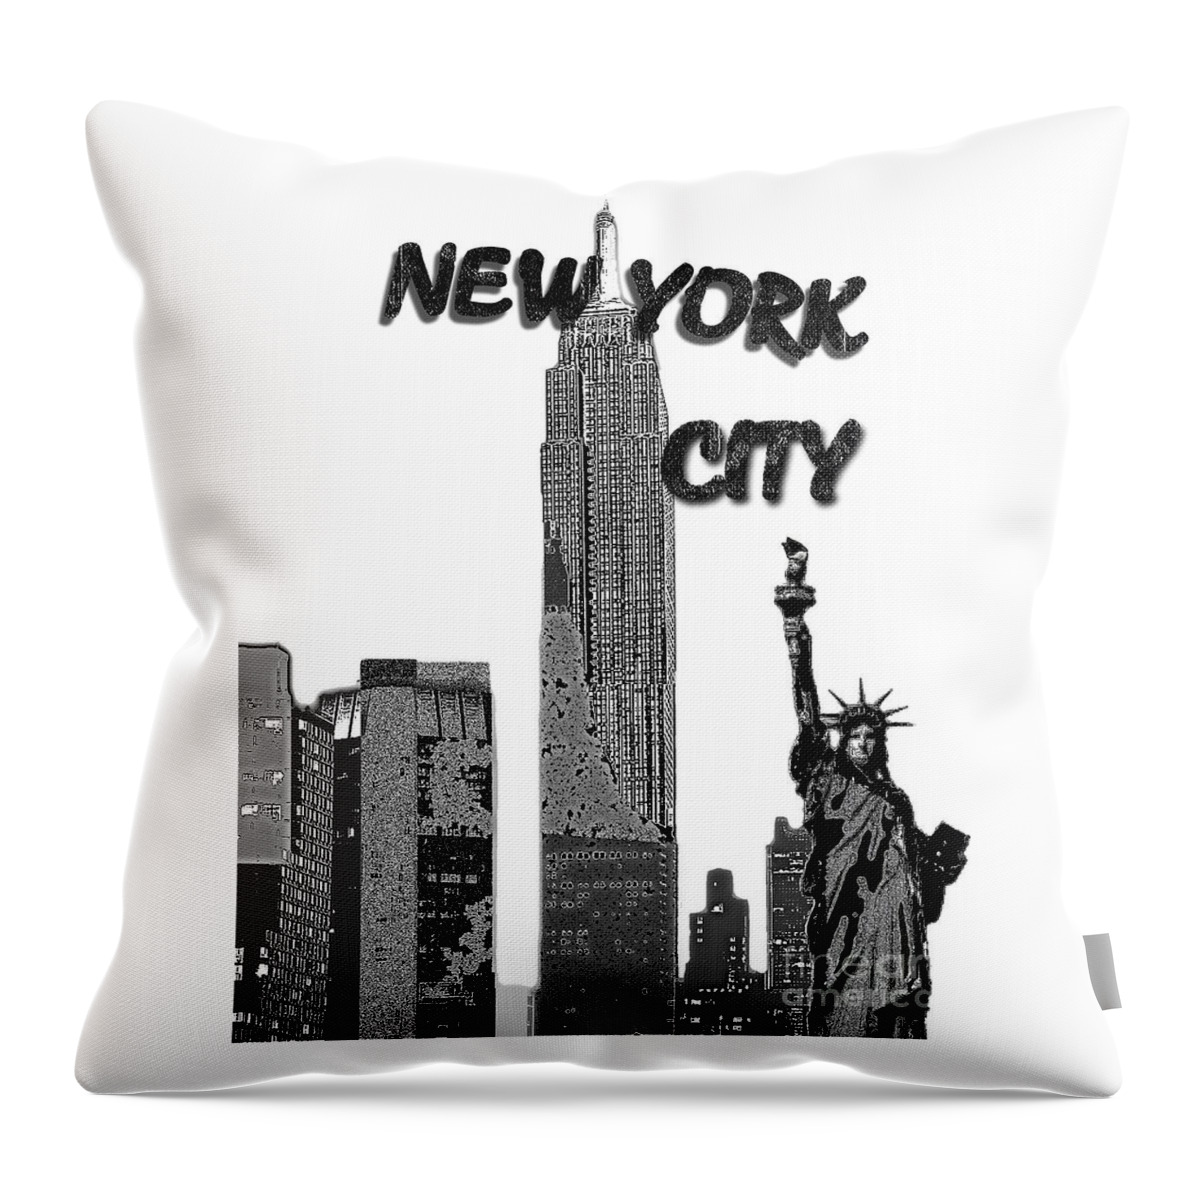 New York City Throw Pillow featuring the mixed media New York City Explicit by Pharris Art